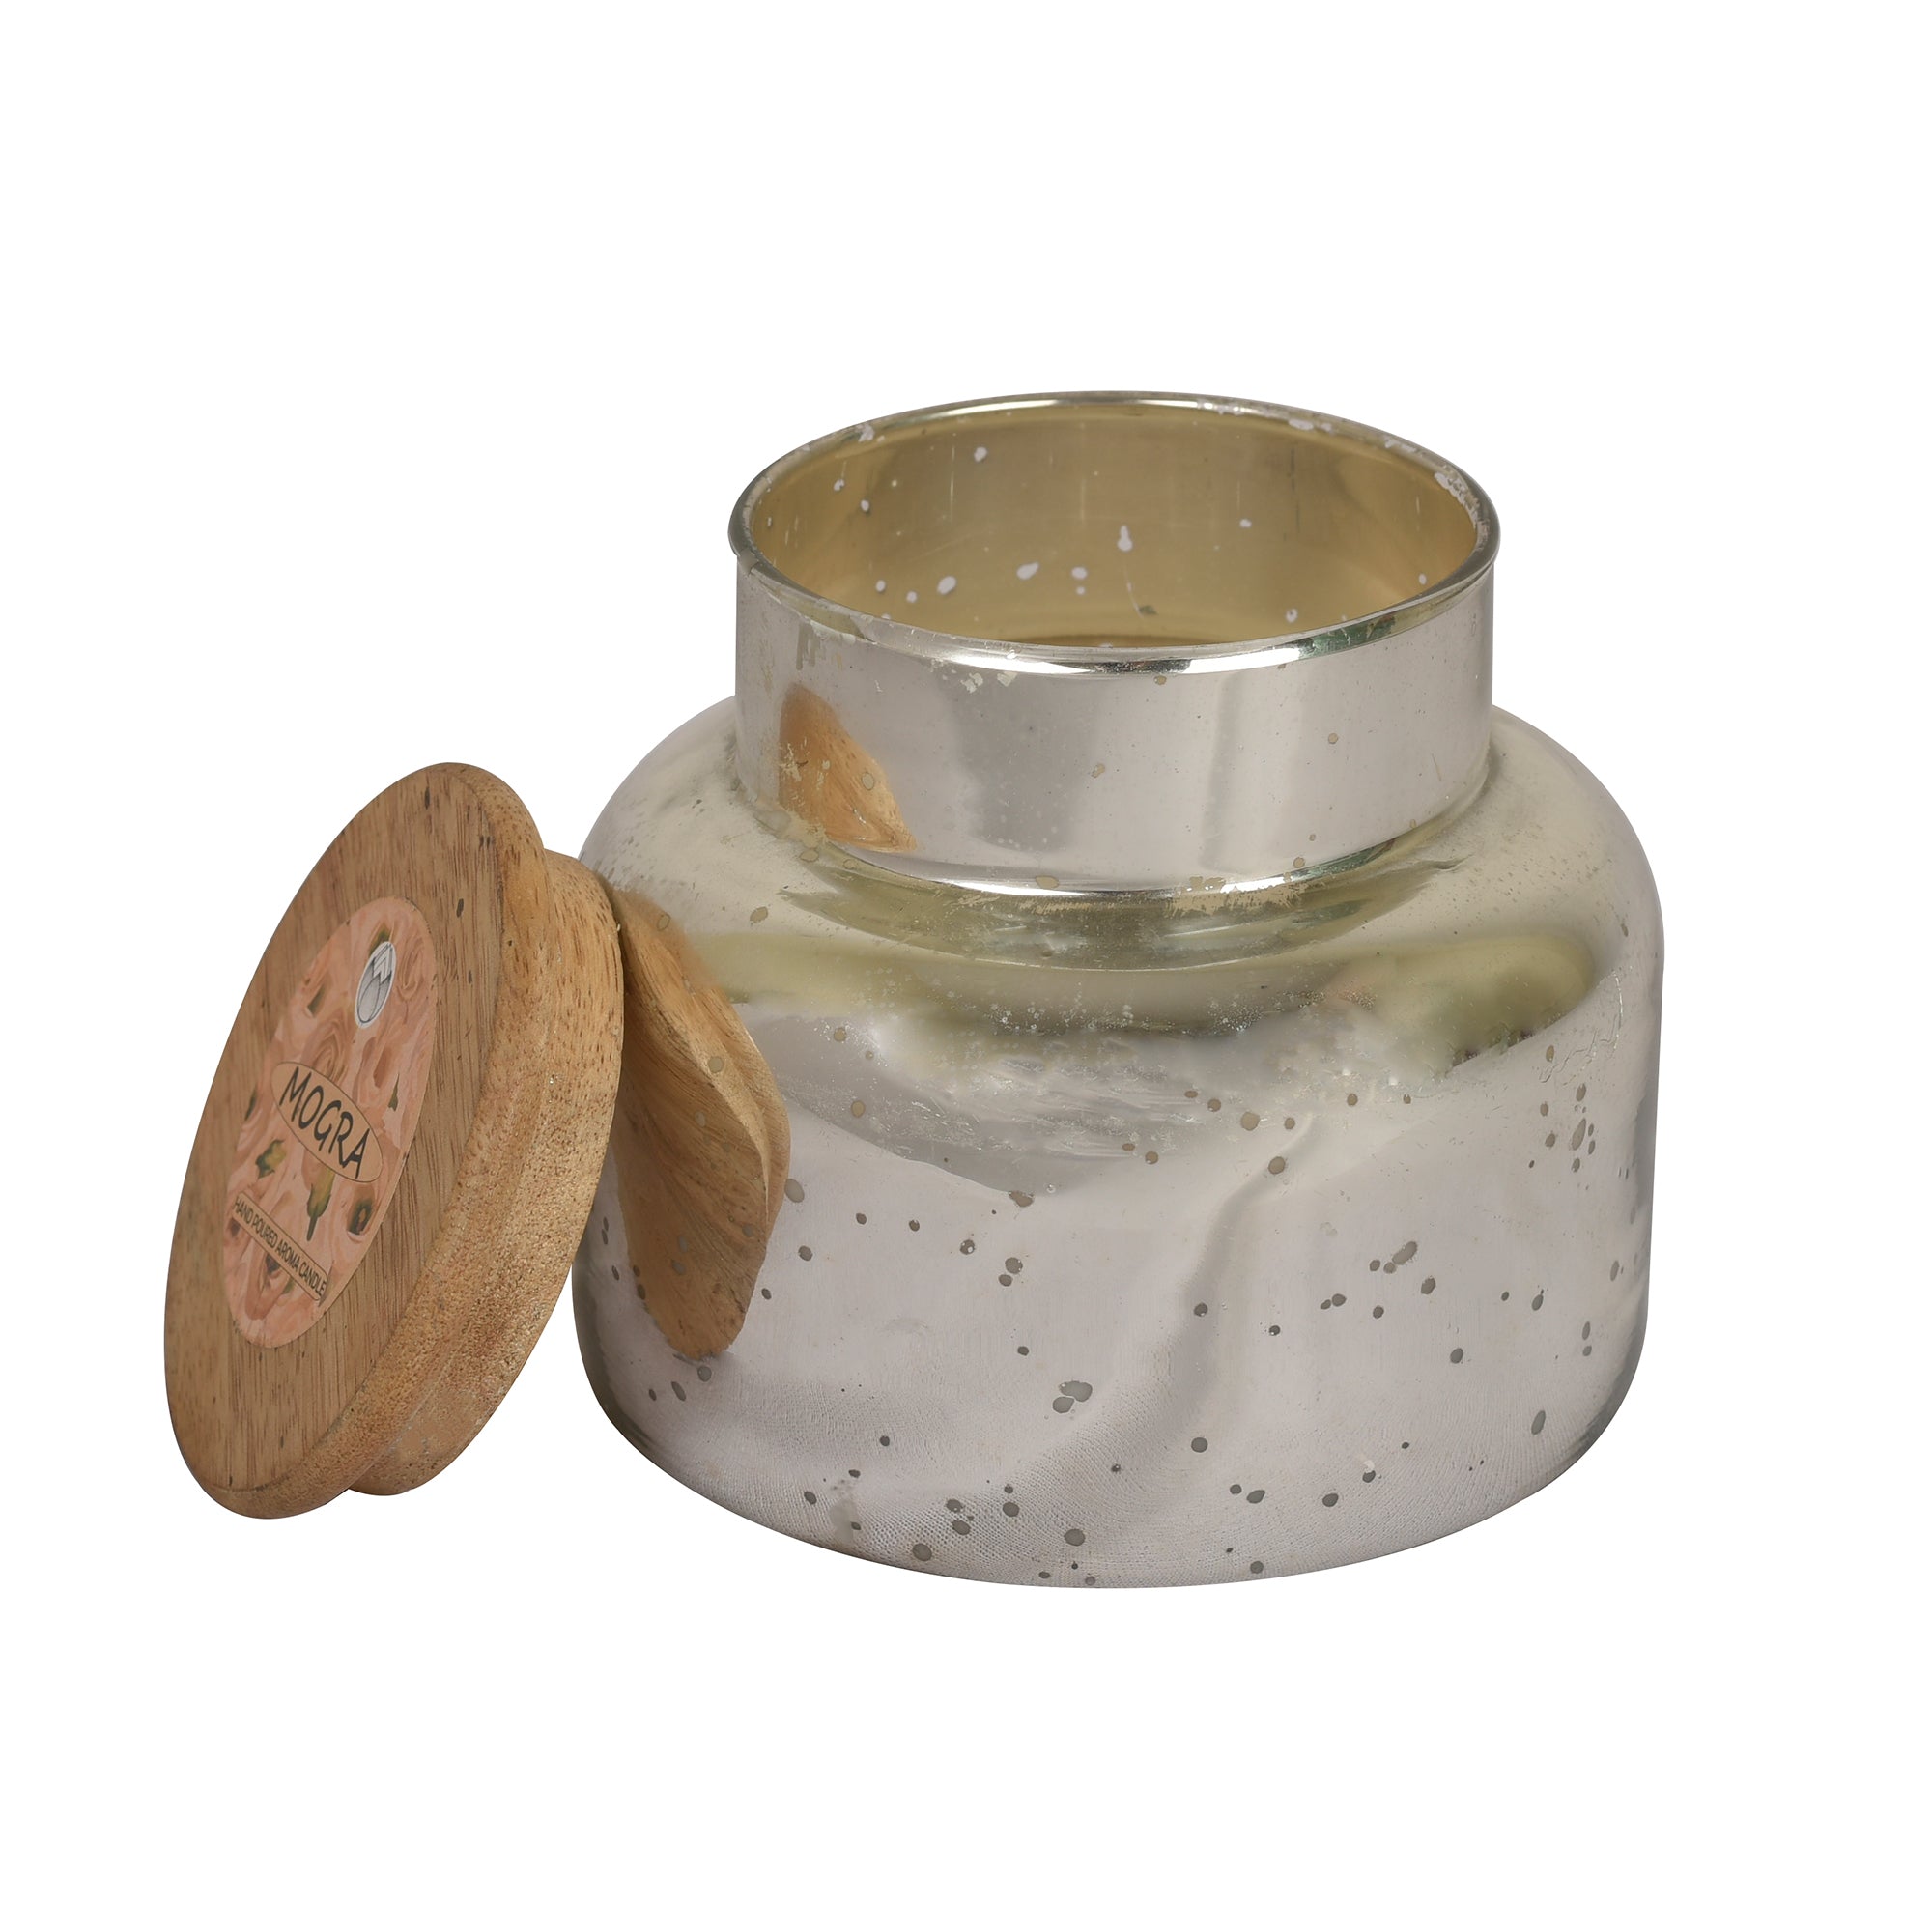 Roshni Mercury Glass Jar filled with flavoured candle and wooden lid 4.5 inches tall